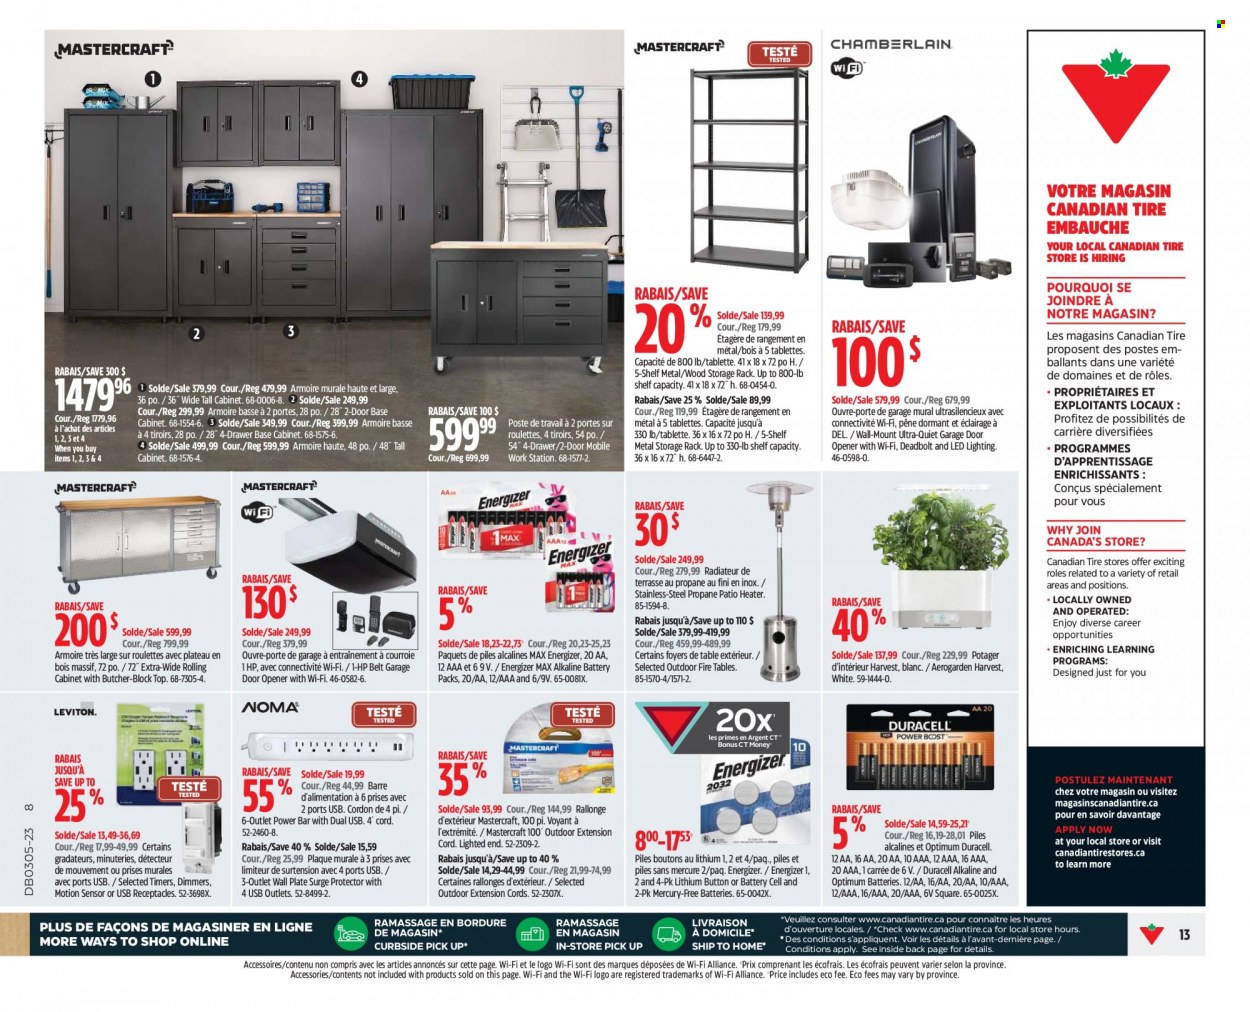 thumbnail - Canadian Tire Flyer - January 26, 2023 - February 01, 2023 - Sales products - plate, Duracell, Optimum, motion sensor, Hewlett Packard, cabinet, table, drawer base, shelves, lighting, surge, surge protector, heater, door opener, garage door opener, belt, extension cord, Energizer. Page 12.